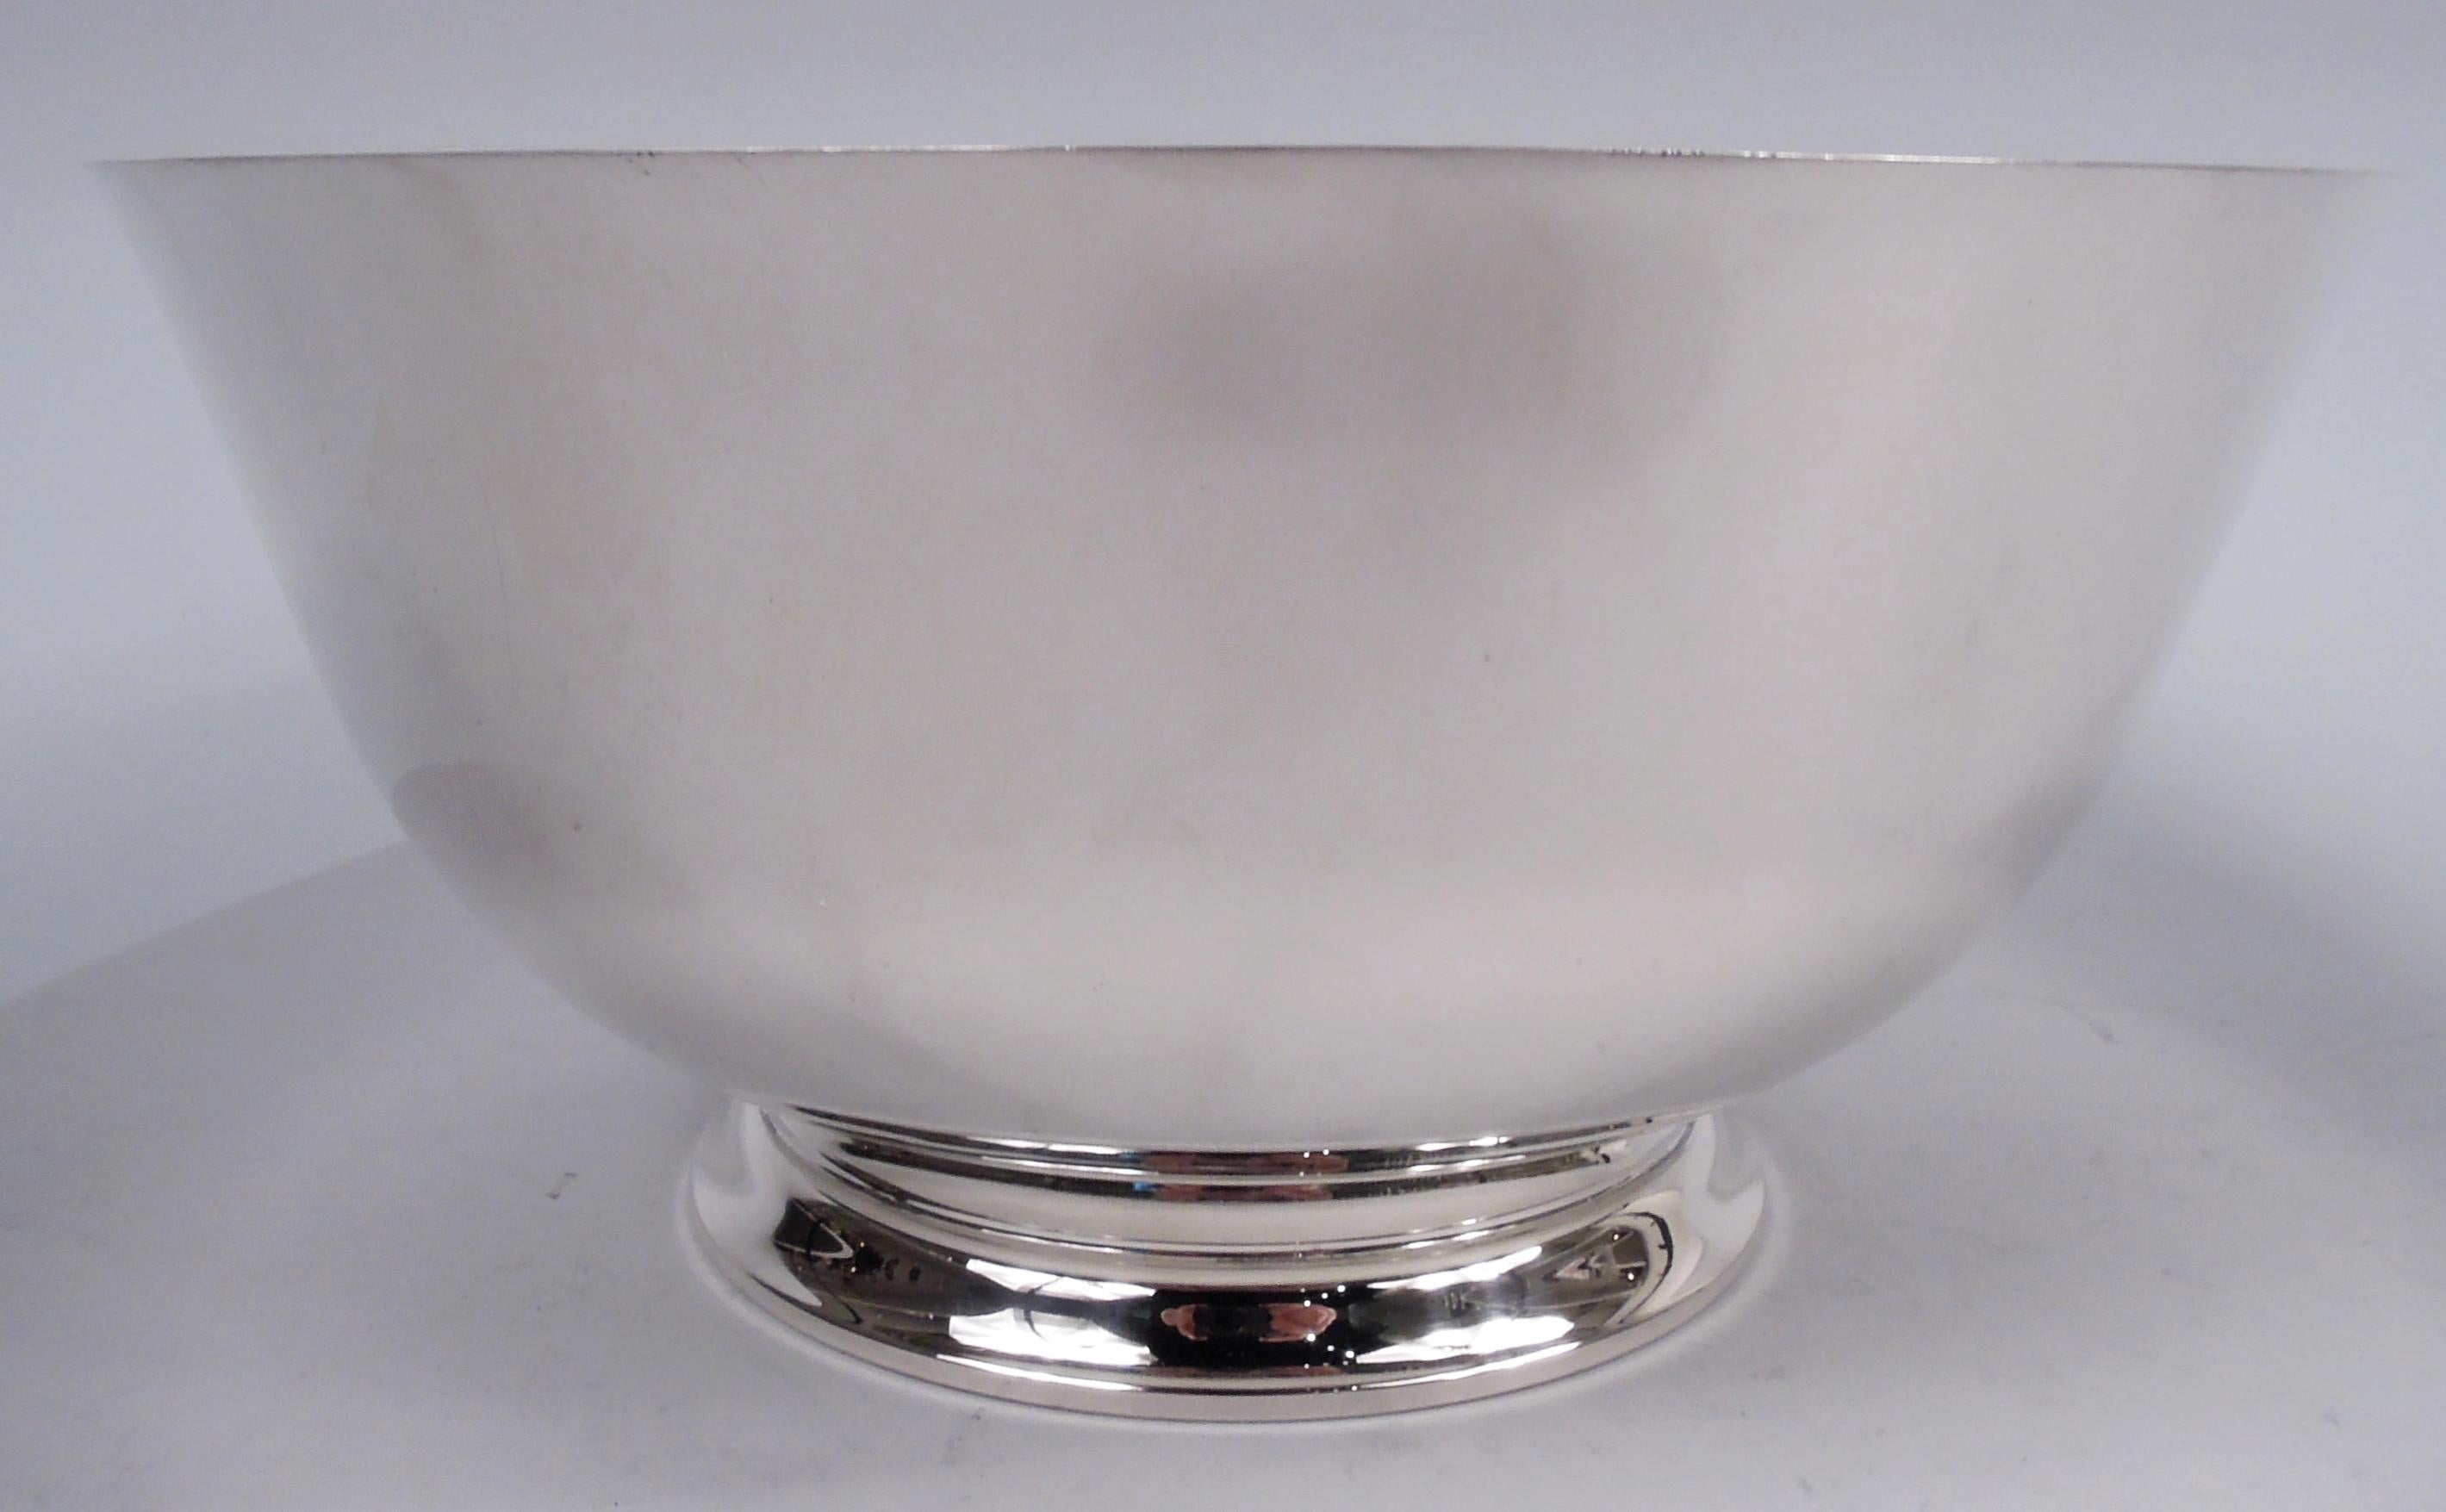 Colonial Revival sterling silver Revere bowl. Made by Watson Company in Attleboro, Mass. Traditional form with curved and tapering sides, gently flared rim, and raised foot. Lots of room for engraving. Fully marked including maker’s stamp, no. B267,